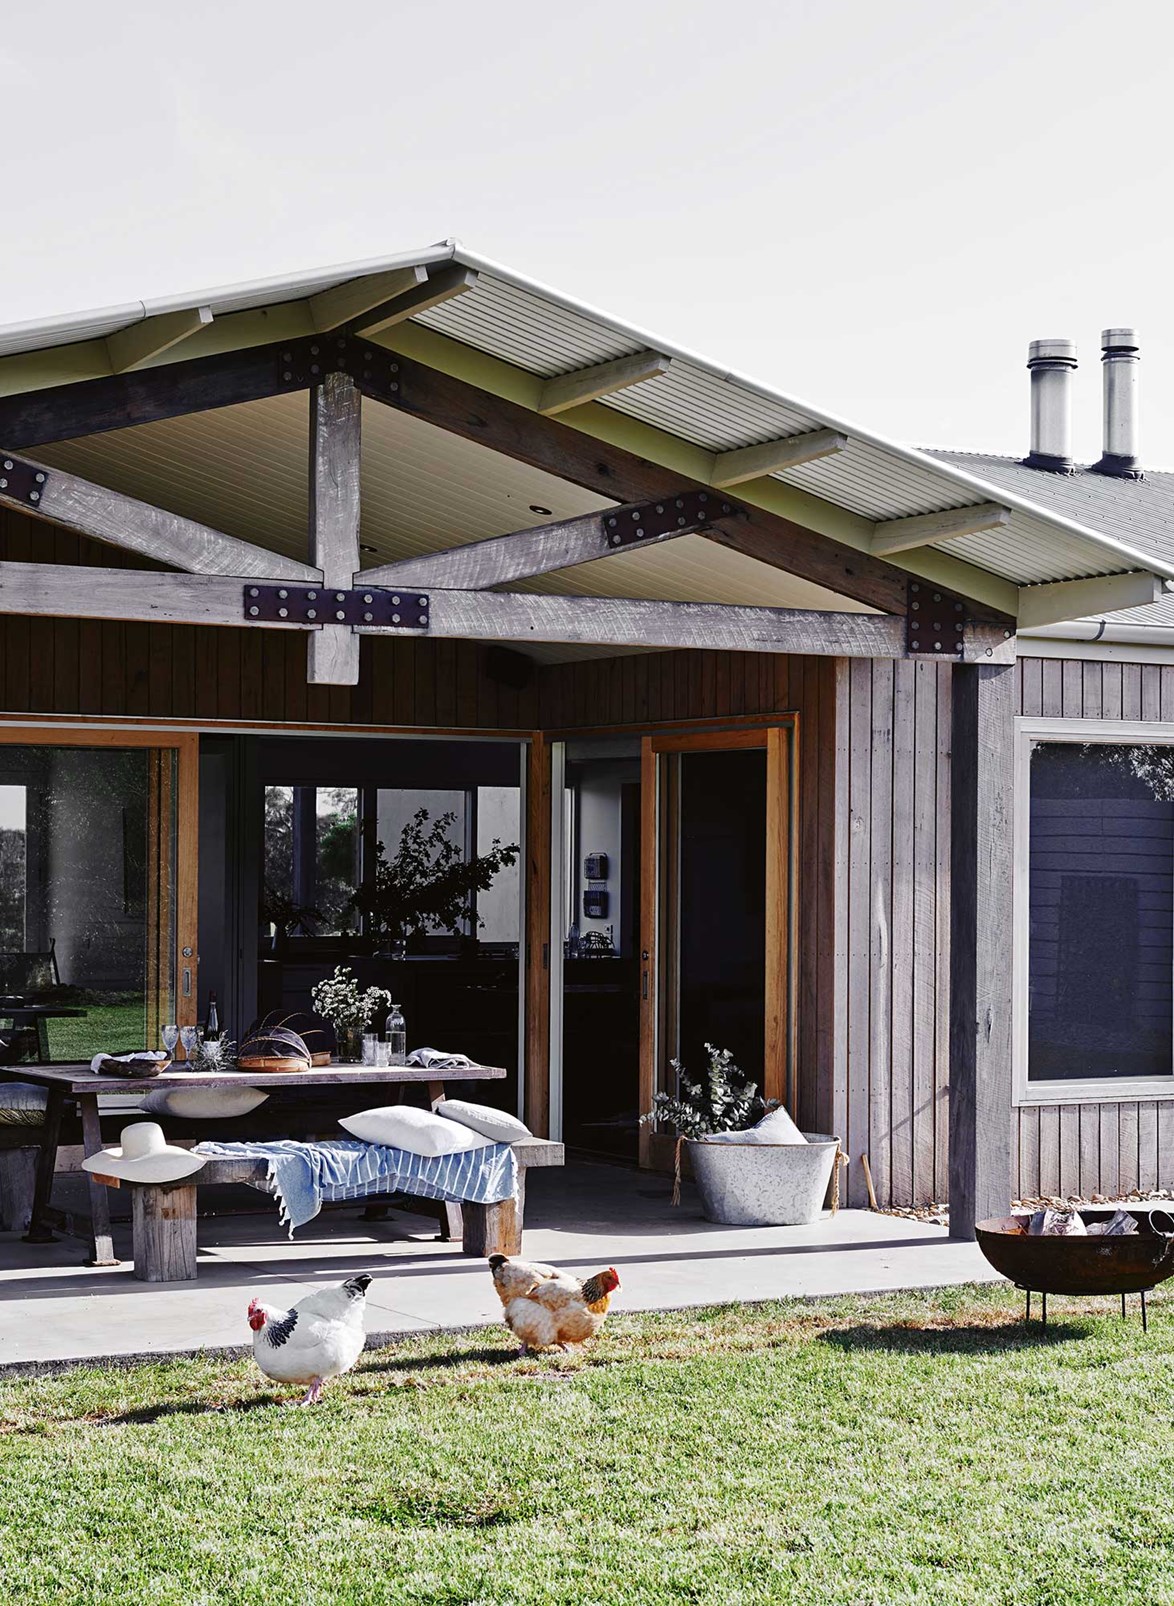 Reclaimed timber frames an impressive back verandah at a [newly built home in Freshwater creek](https://www.homestolove.com.au/designer-dream-home-in-freshwater-creek-victoria-13657|target="_blank"). A brood of chooks scan the lawn for signs of food. *Photo: Lisa Cohen / Stylist: Tess Newman-Morris*